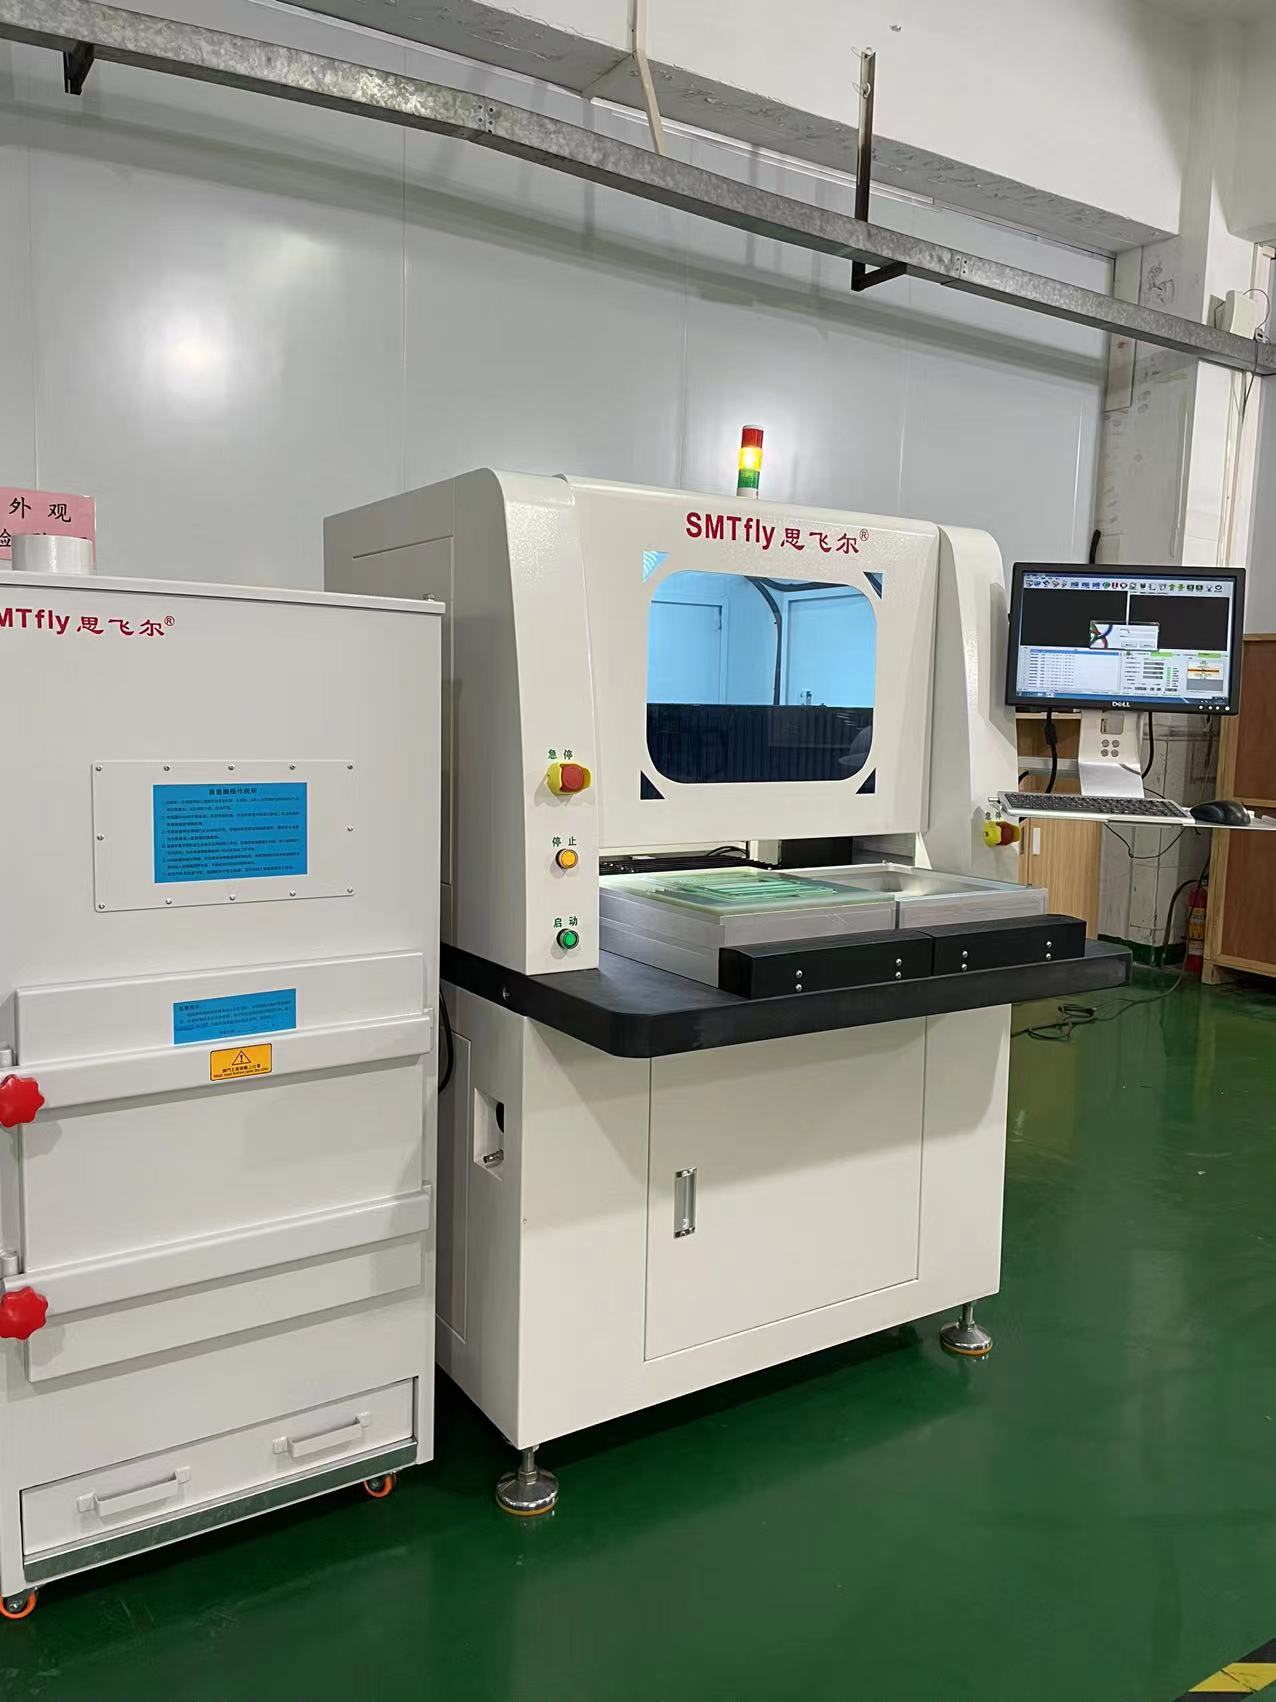 PCB Router Cutting Equipment for Depaneling PCBA,SMTfly-F01